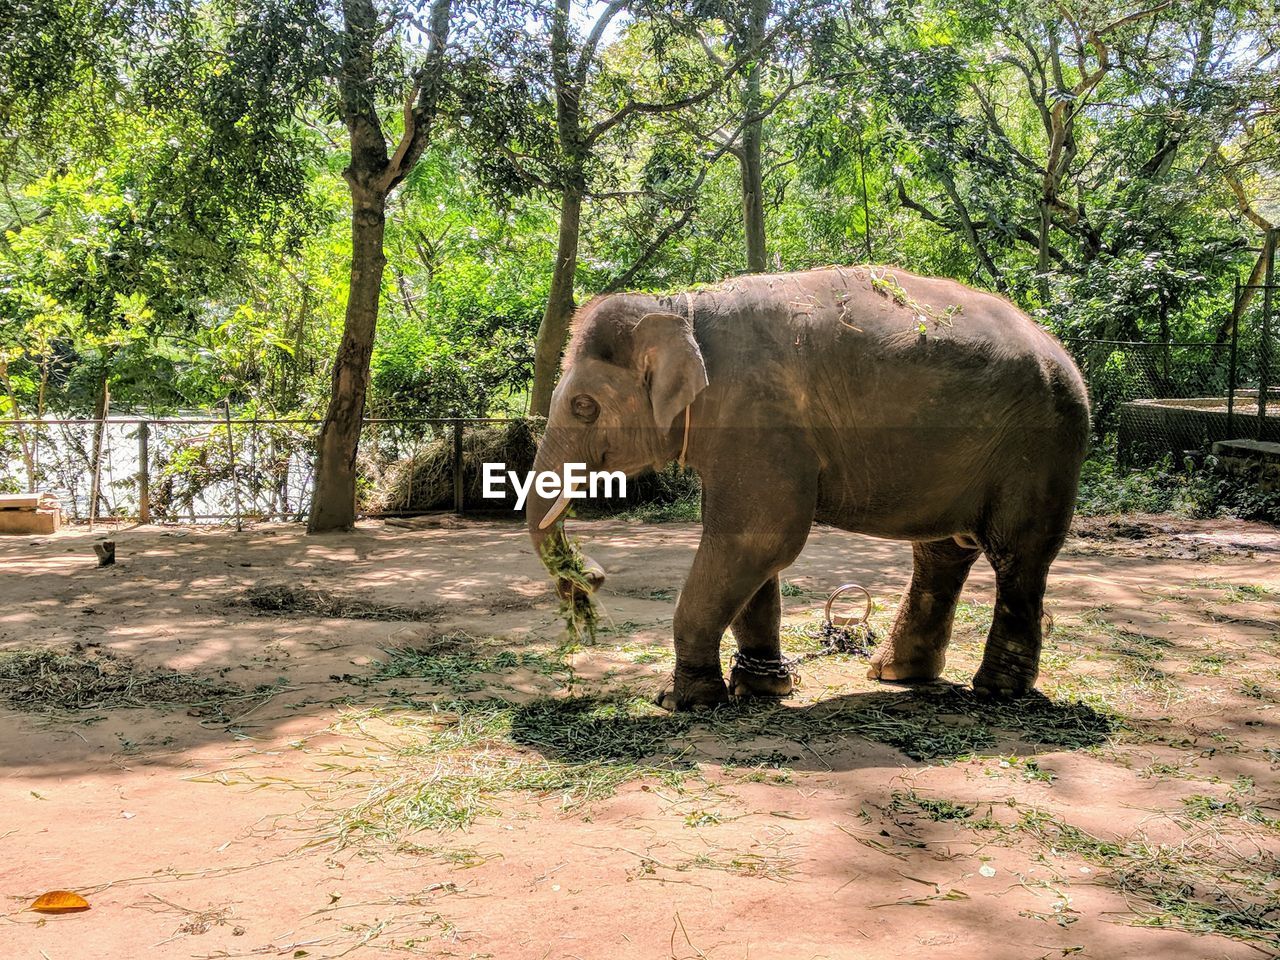 ELEPHANT STANDING IN A FOREST